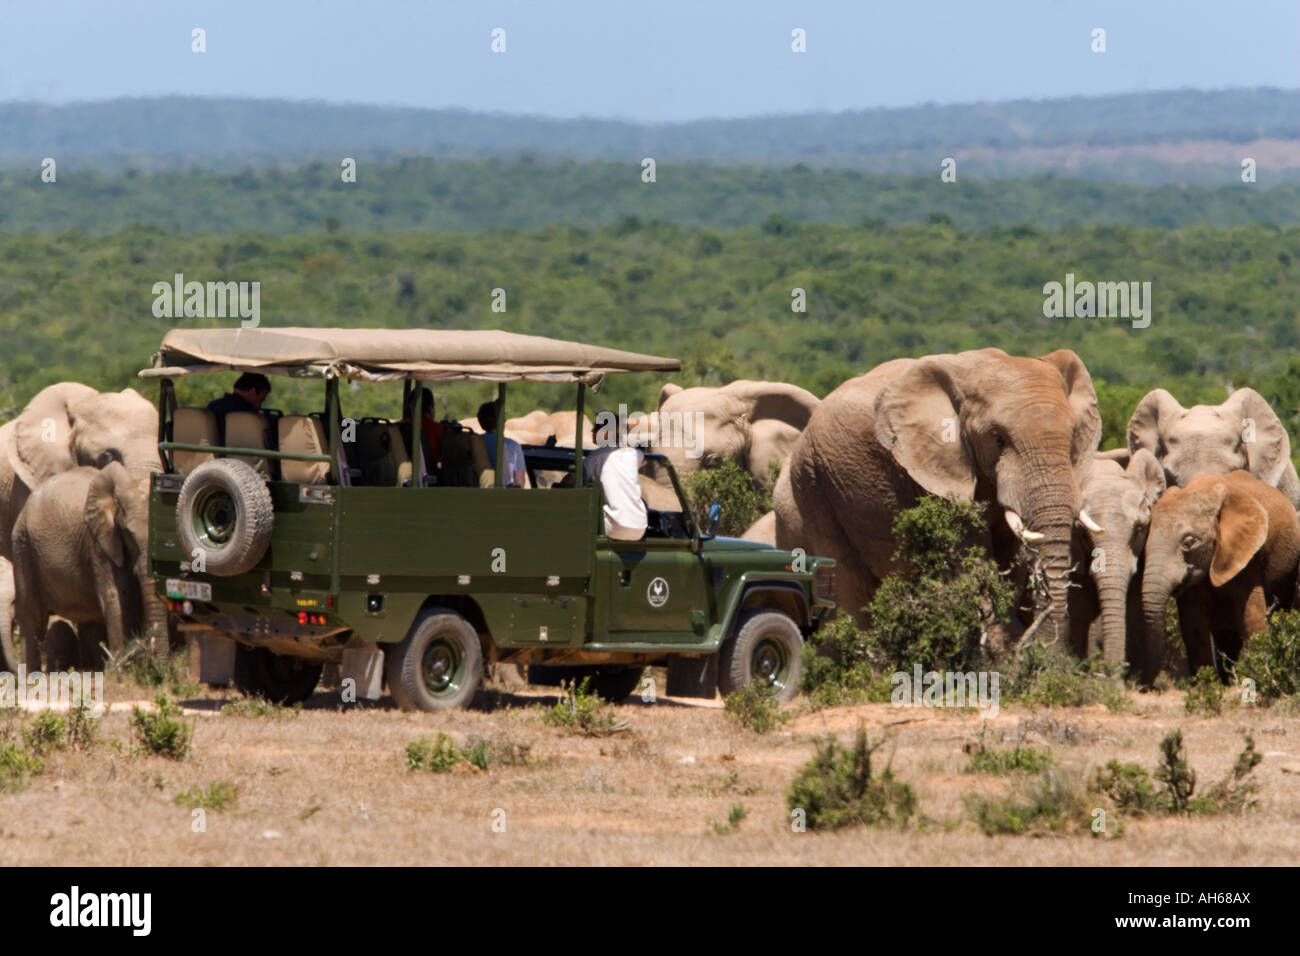 Tourists viewing elephants Addo national park South Africa Stock Photo